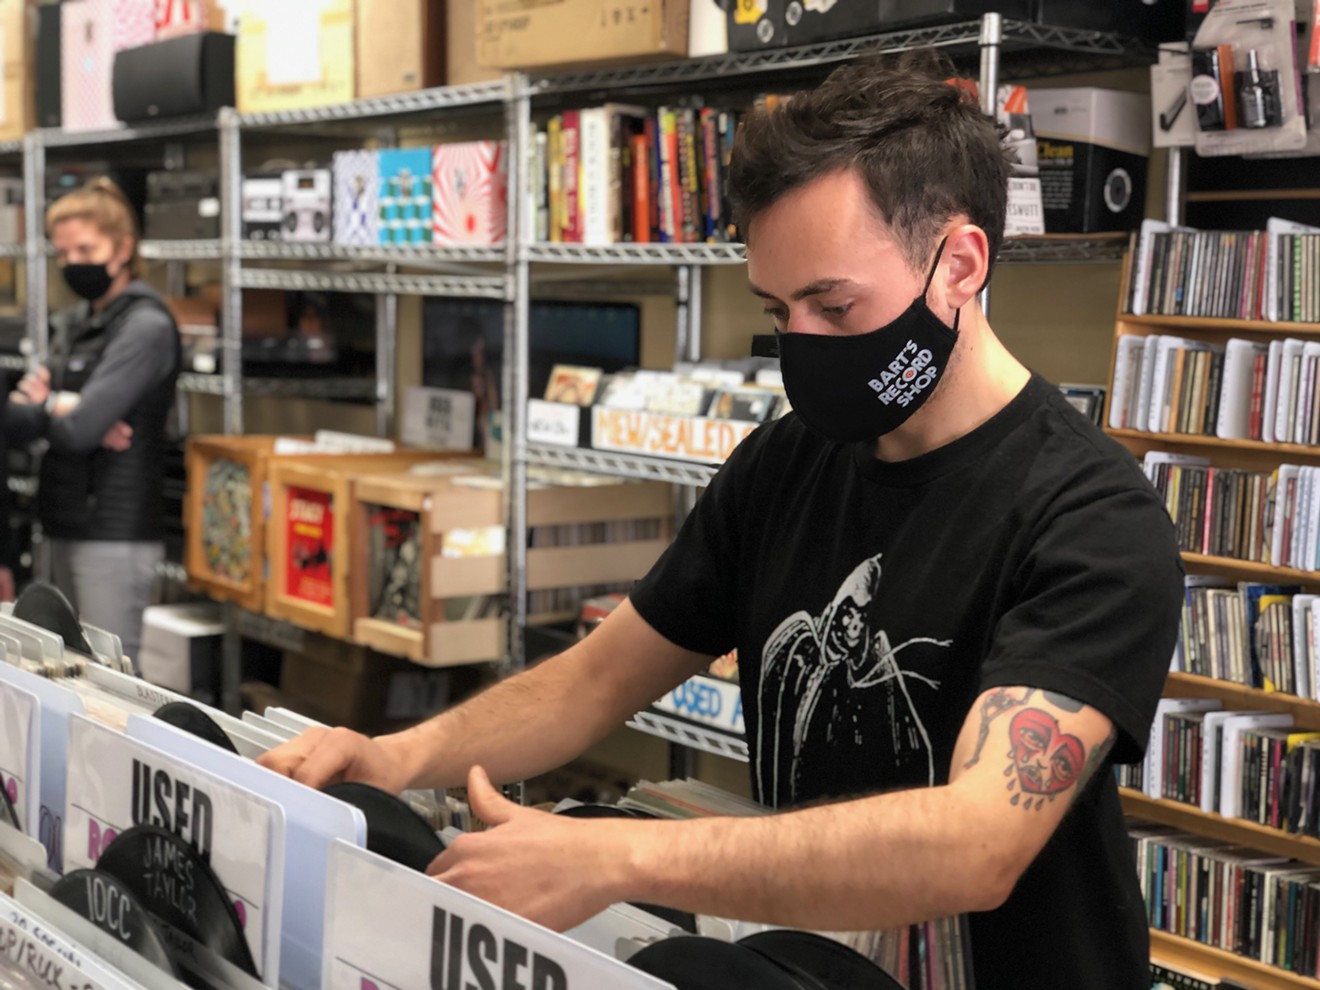 New employee Cole Eckert flips through records at Bart's, soon to be Paradise Found.